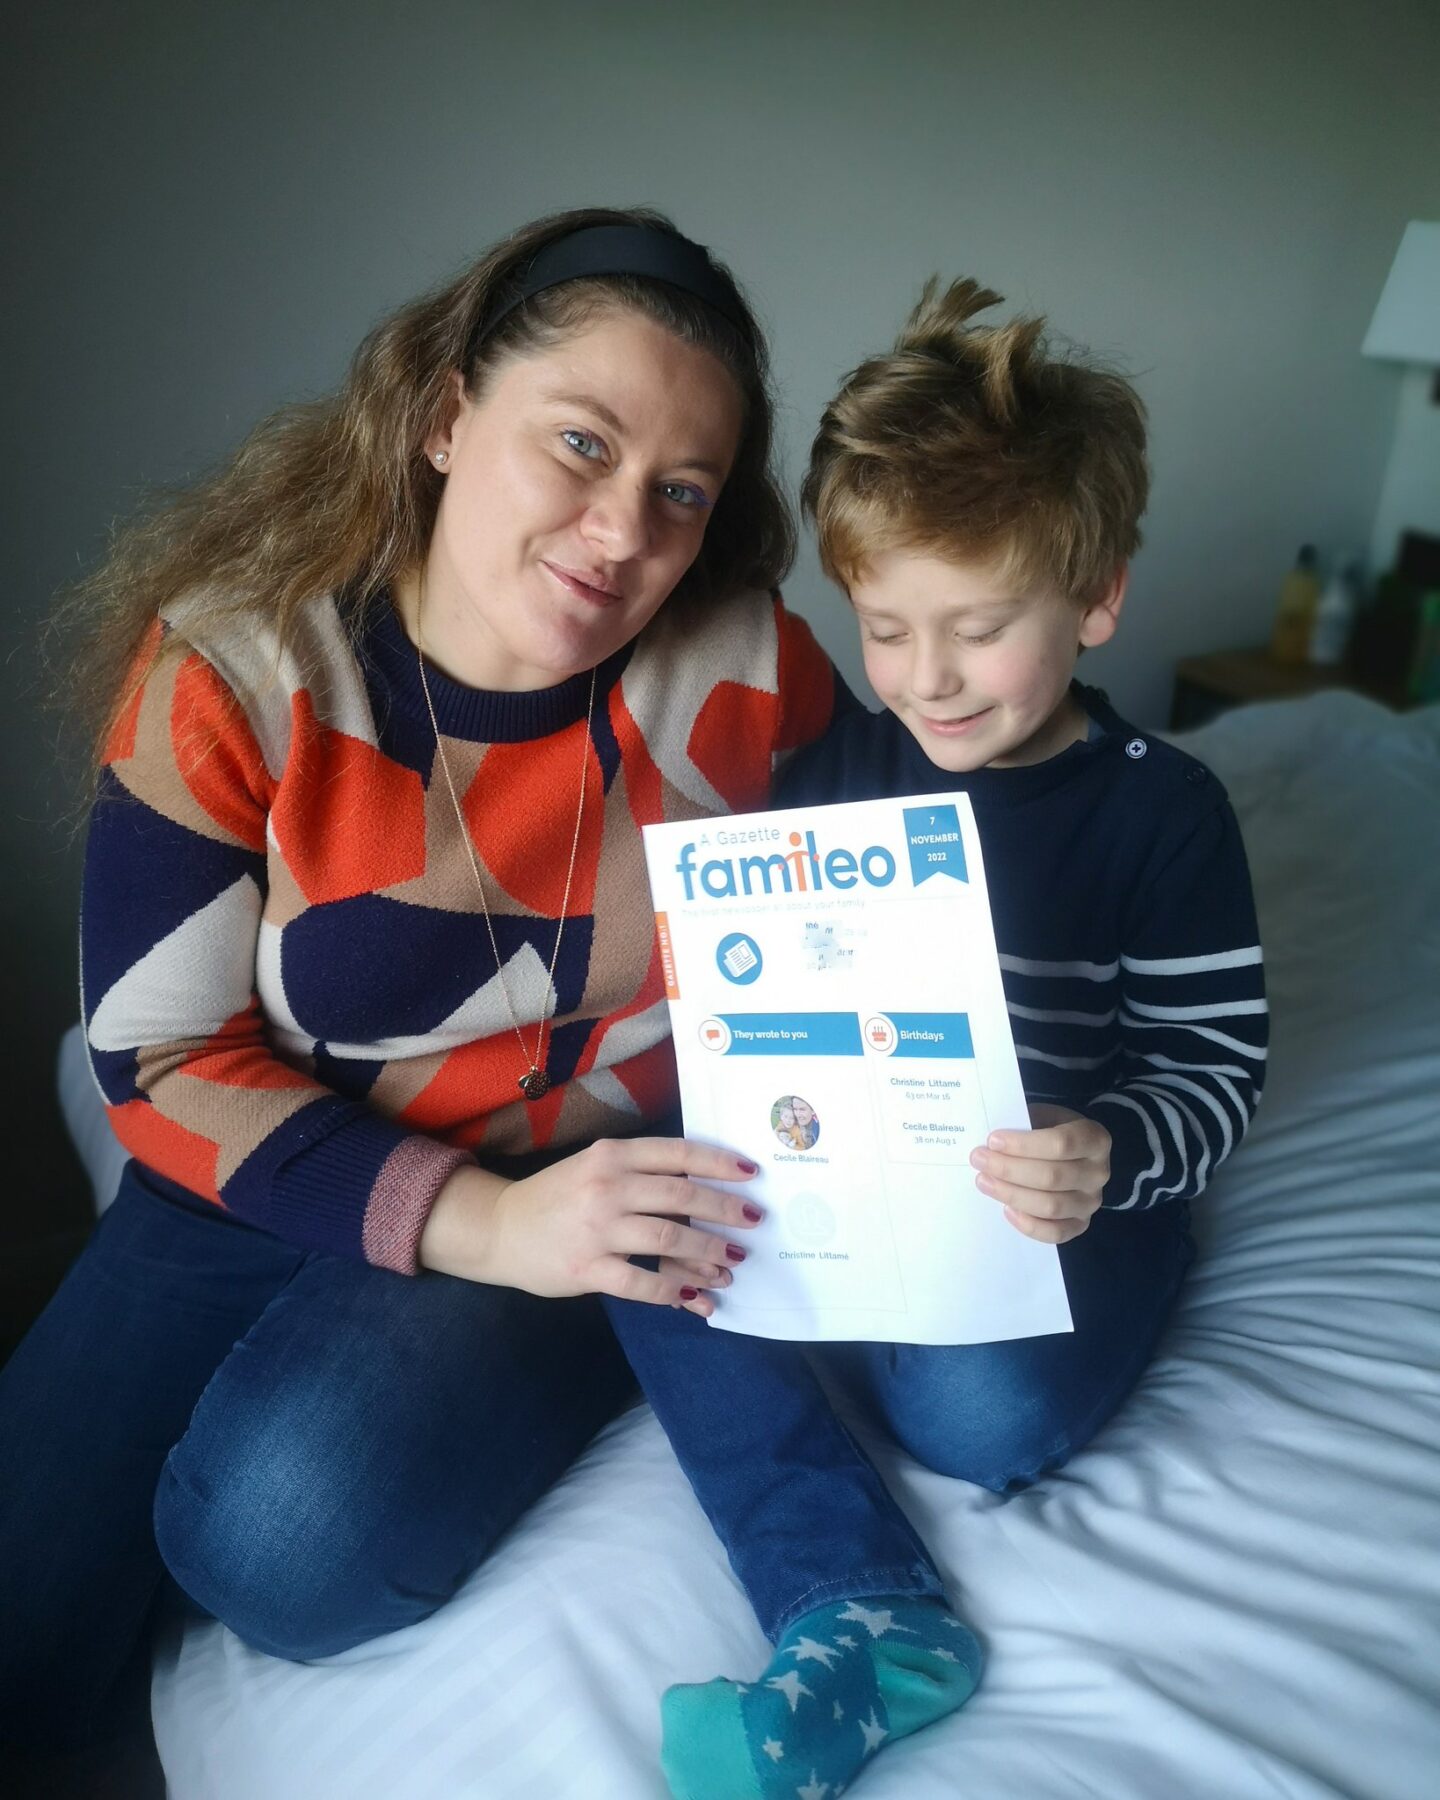 Famileo Subscription, Famileo Newspaper, Family Newspaper, Share News, Photo App, Family App, the Frenchie Mummy, Mother's Day Present, Mother's Day Giveaway, Win, Competition, Family News, Expat Life, App Review